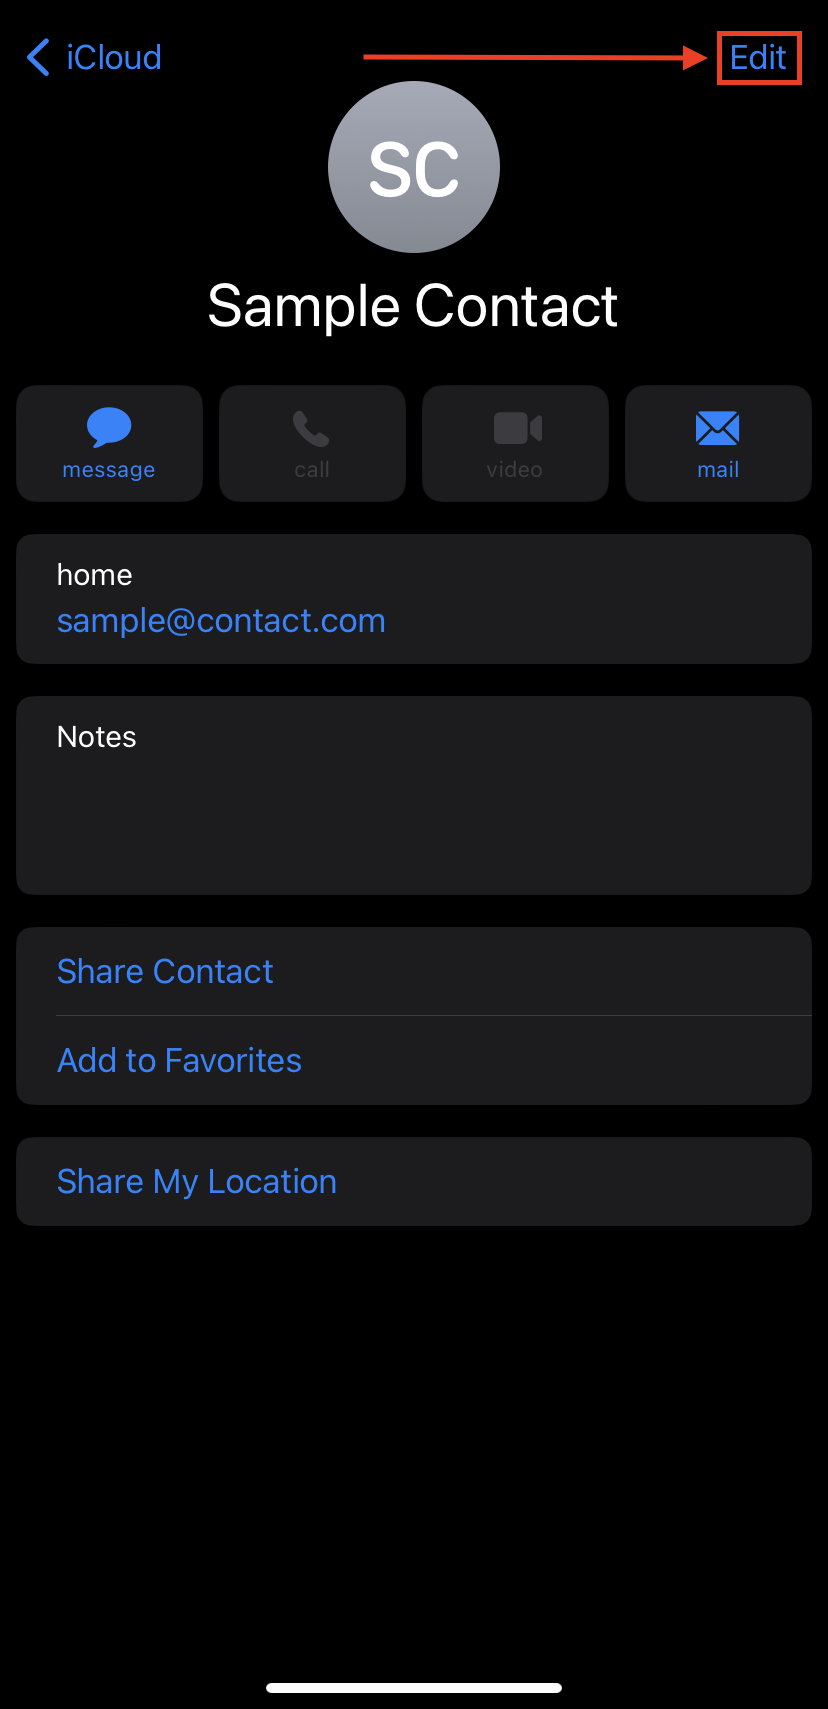 Edit contact button in the iPhone's Contacts app